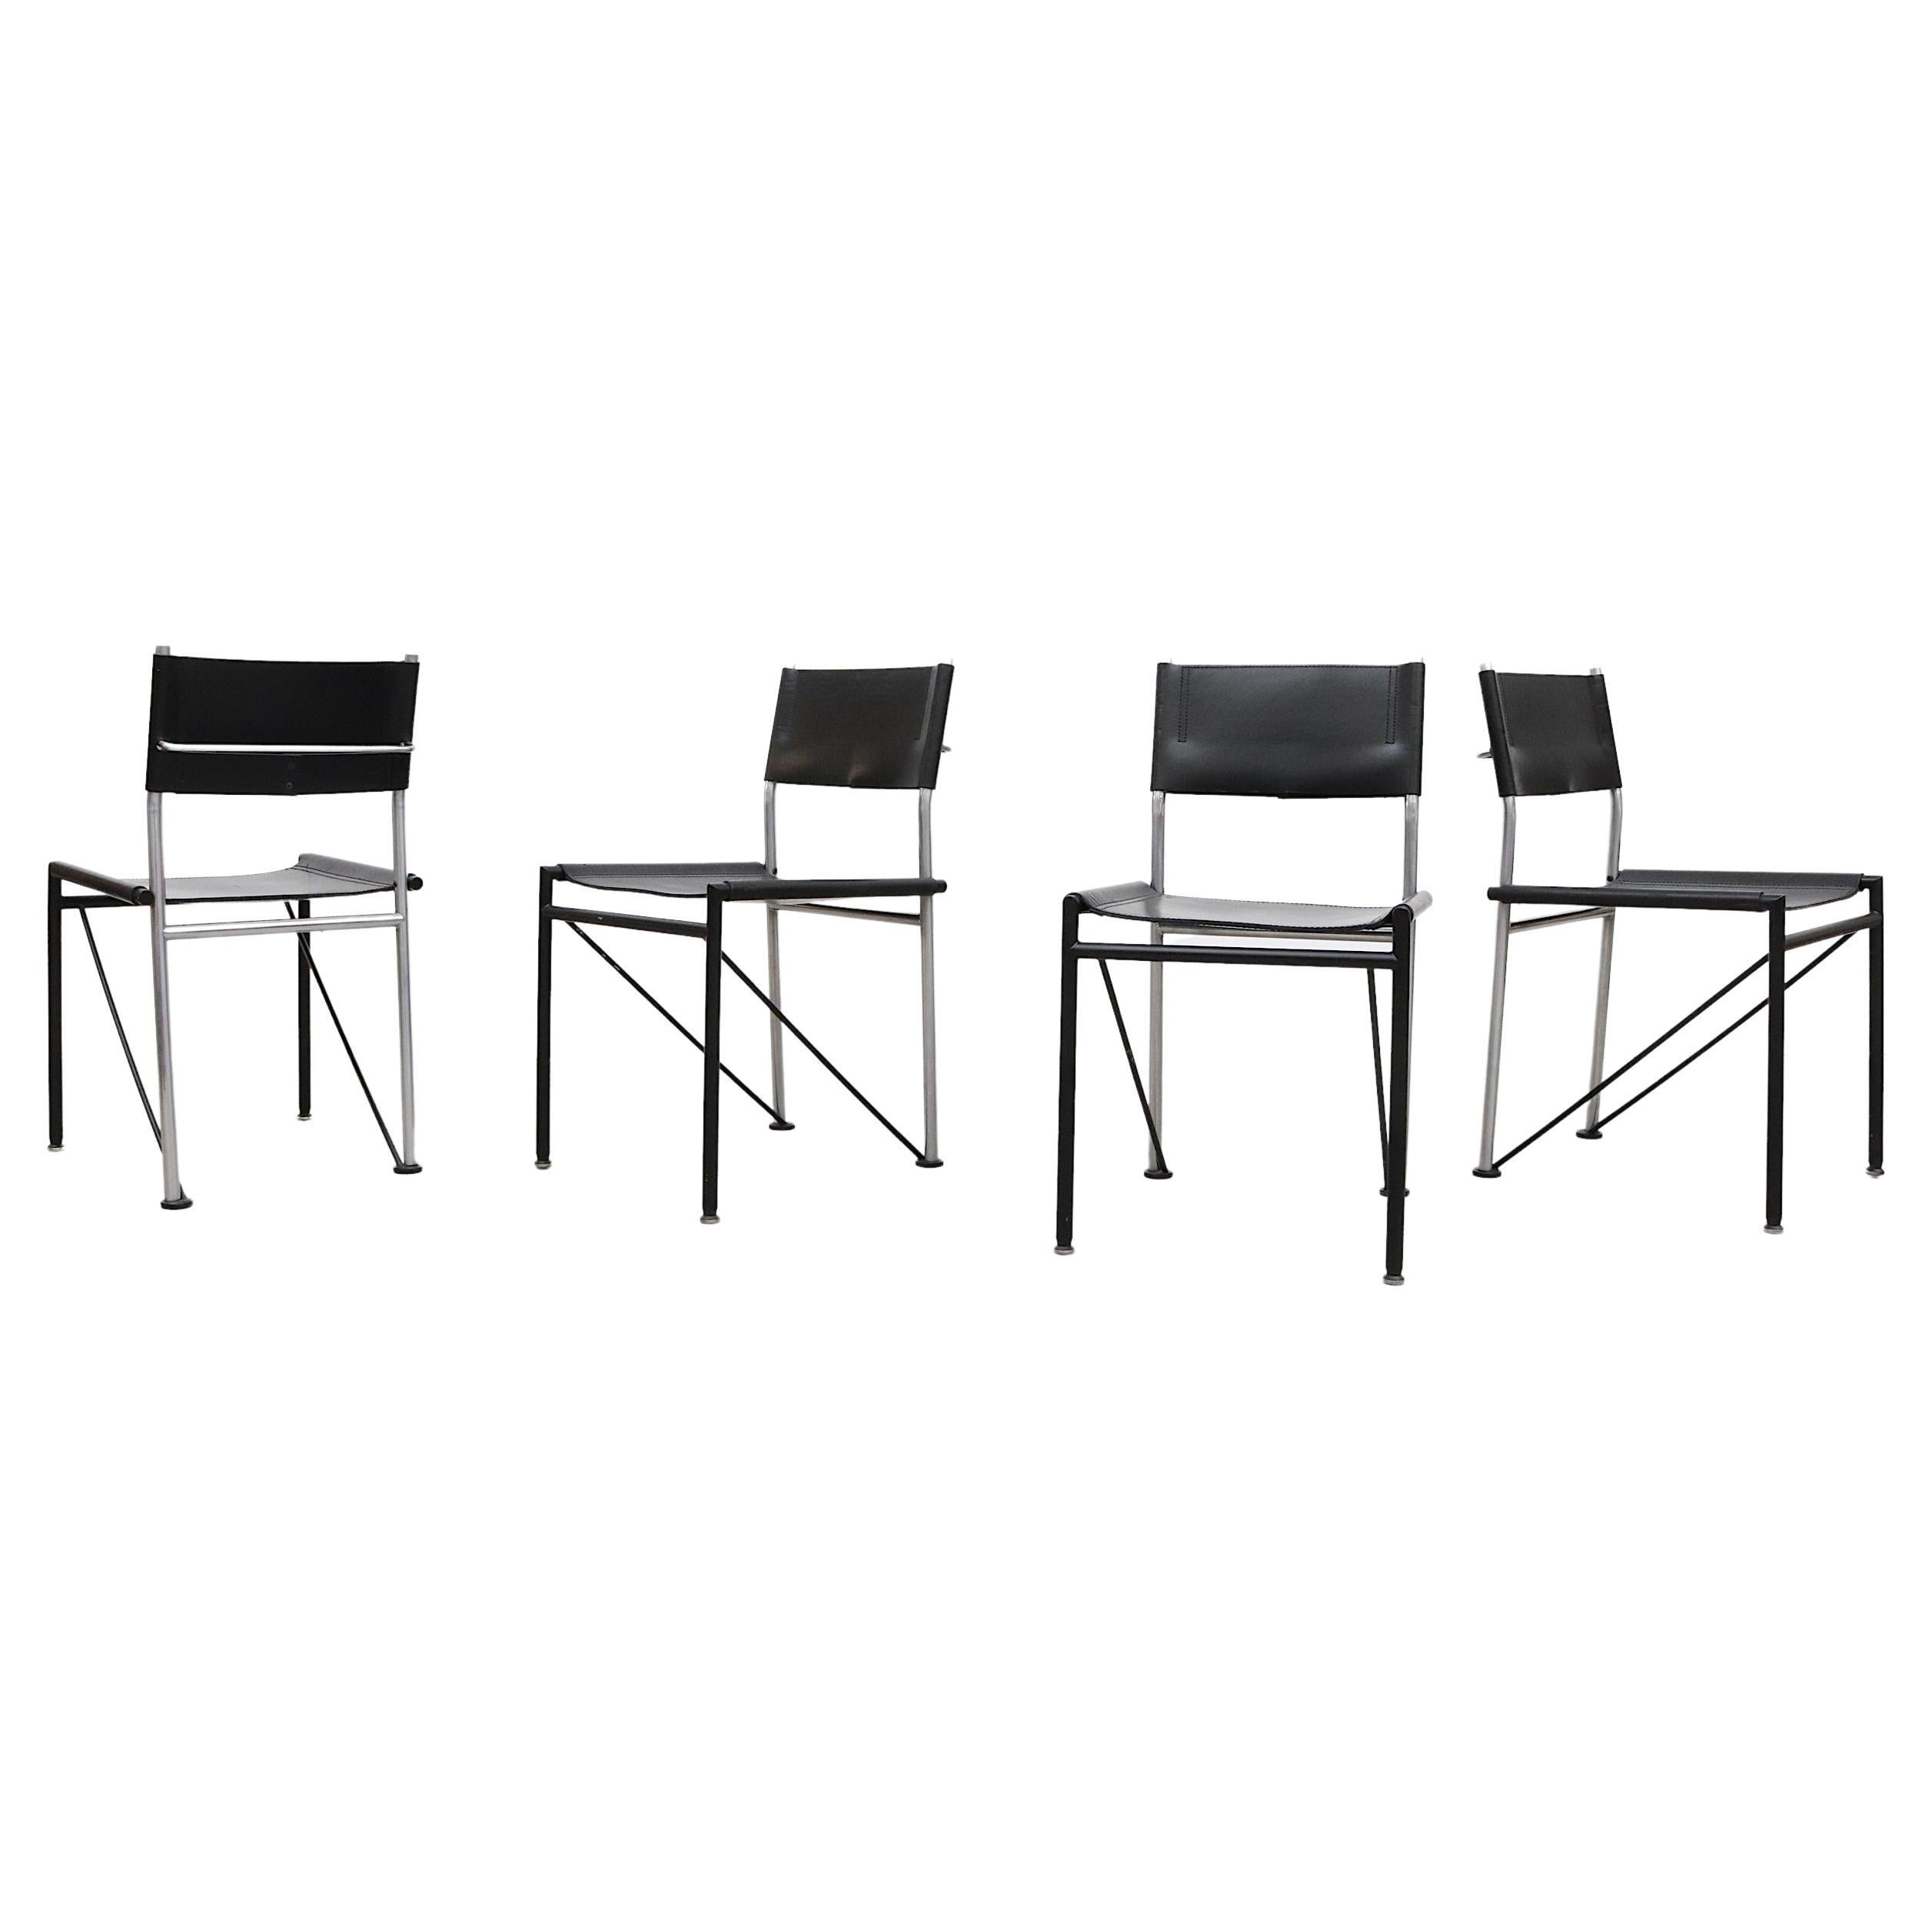 Set of 4 Arnold Merckx Black Leather Dining Chairs for Metaform